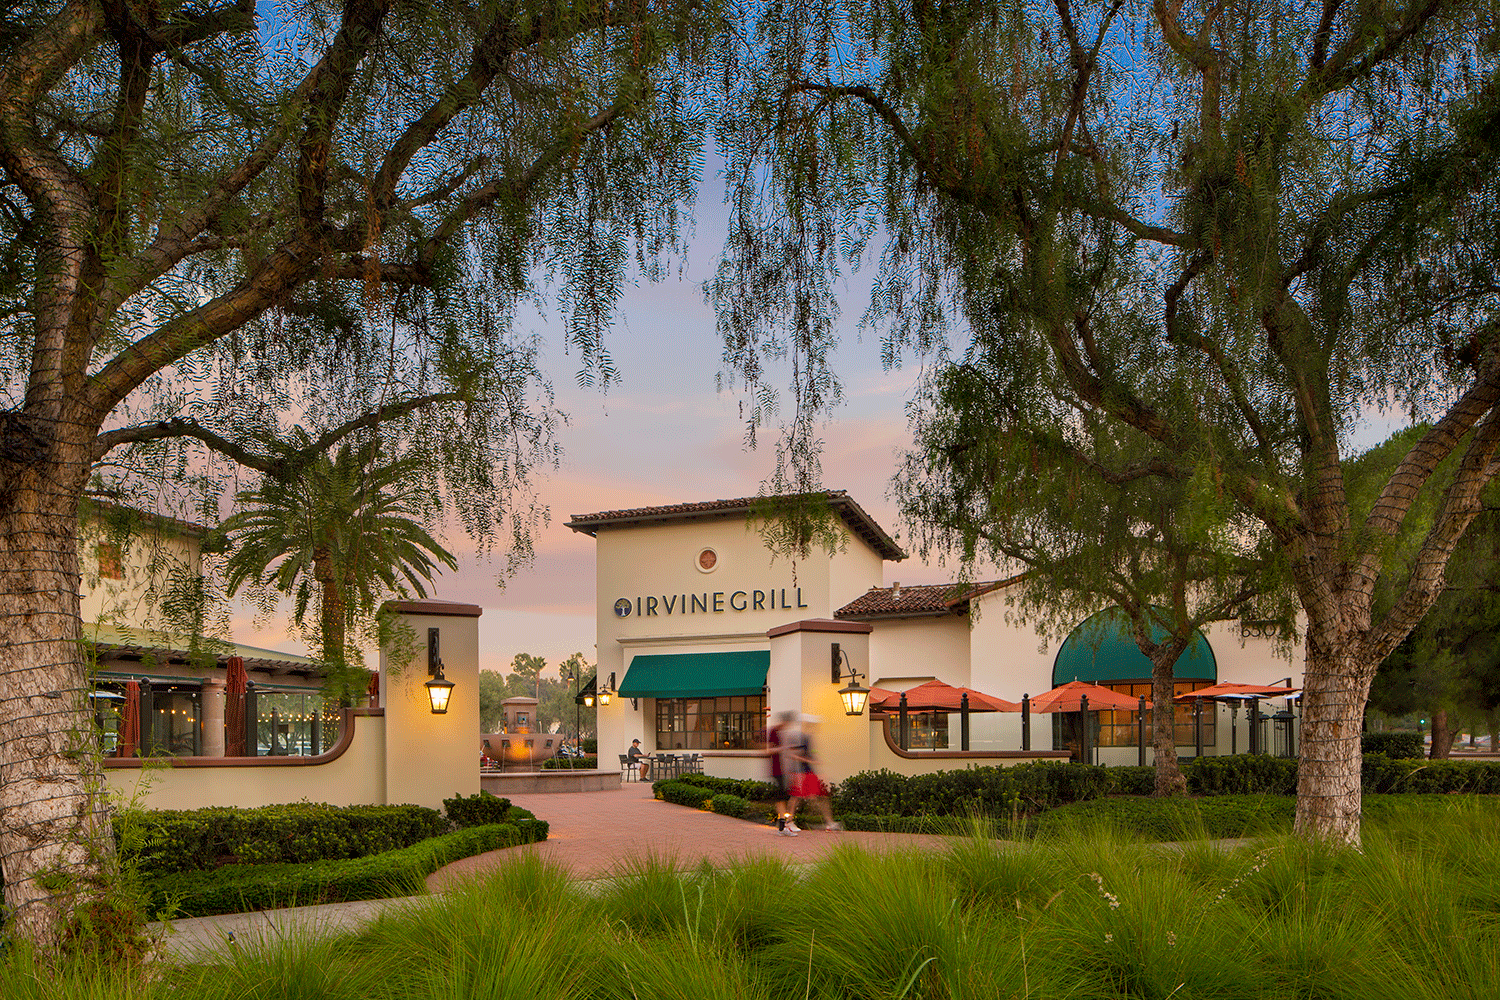  Exterior view of Quail Hill® Shopping Center at dusk